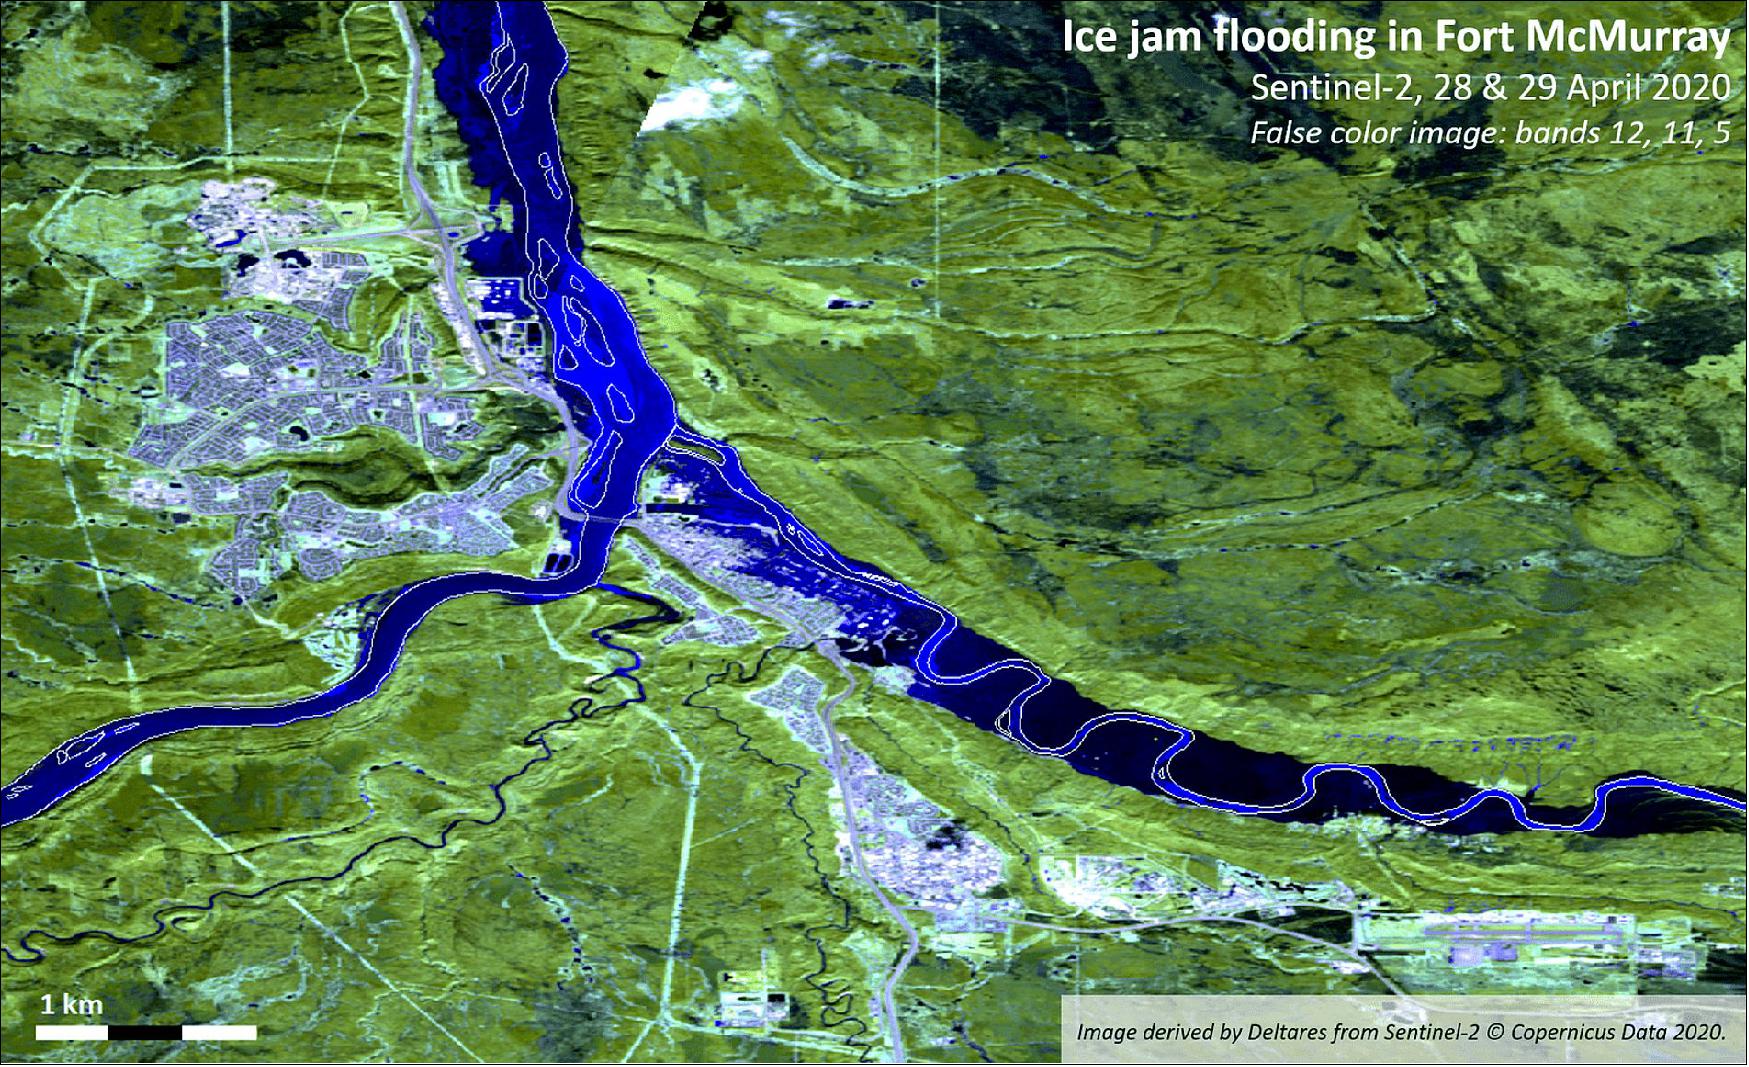 Figure 37: This false-color image was captured by the Copernicus Sentinel-2 mission and shows the extent of the flooding. This composite image contains images acquired on 28 April (majority of image, bottom right) and 29 April 2020 (top left). White lines in the image indicate the normal extent of the river channel (image credit: ESA, the image contains modified Copernicus Sentinel data (2020), processed by Deltares)